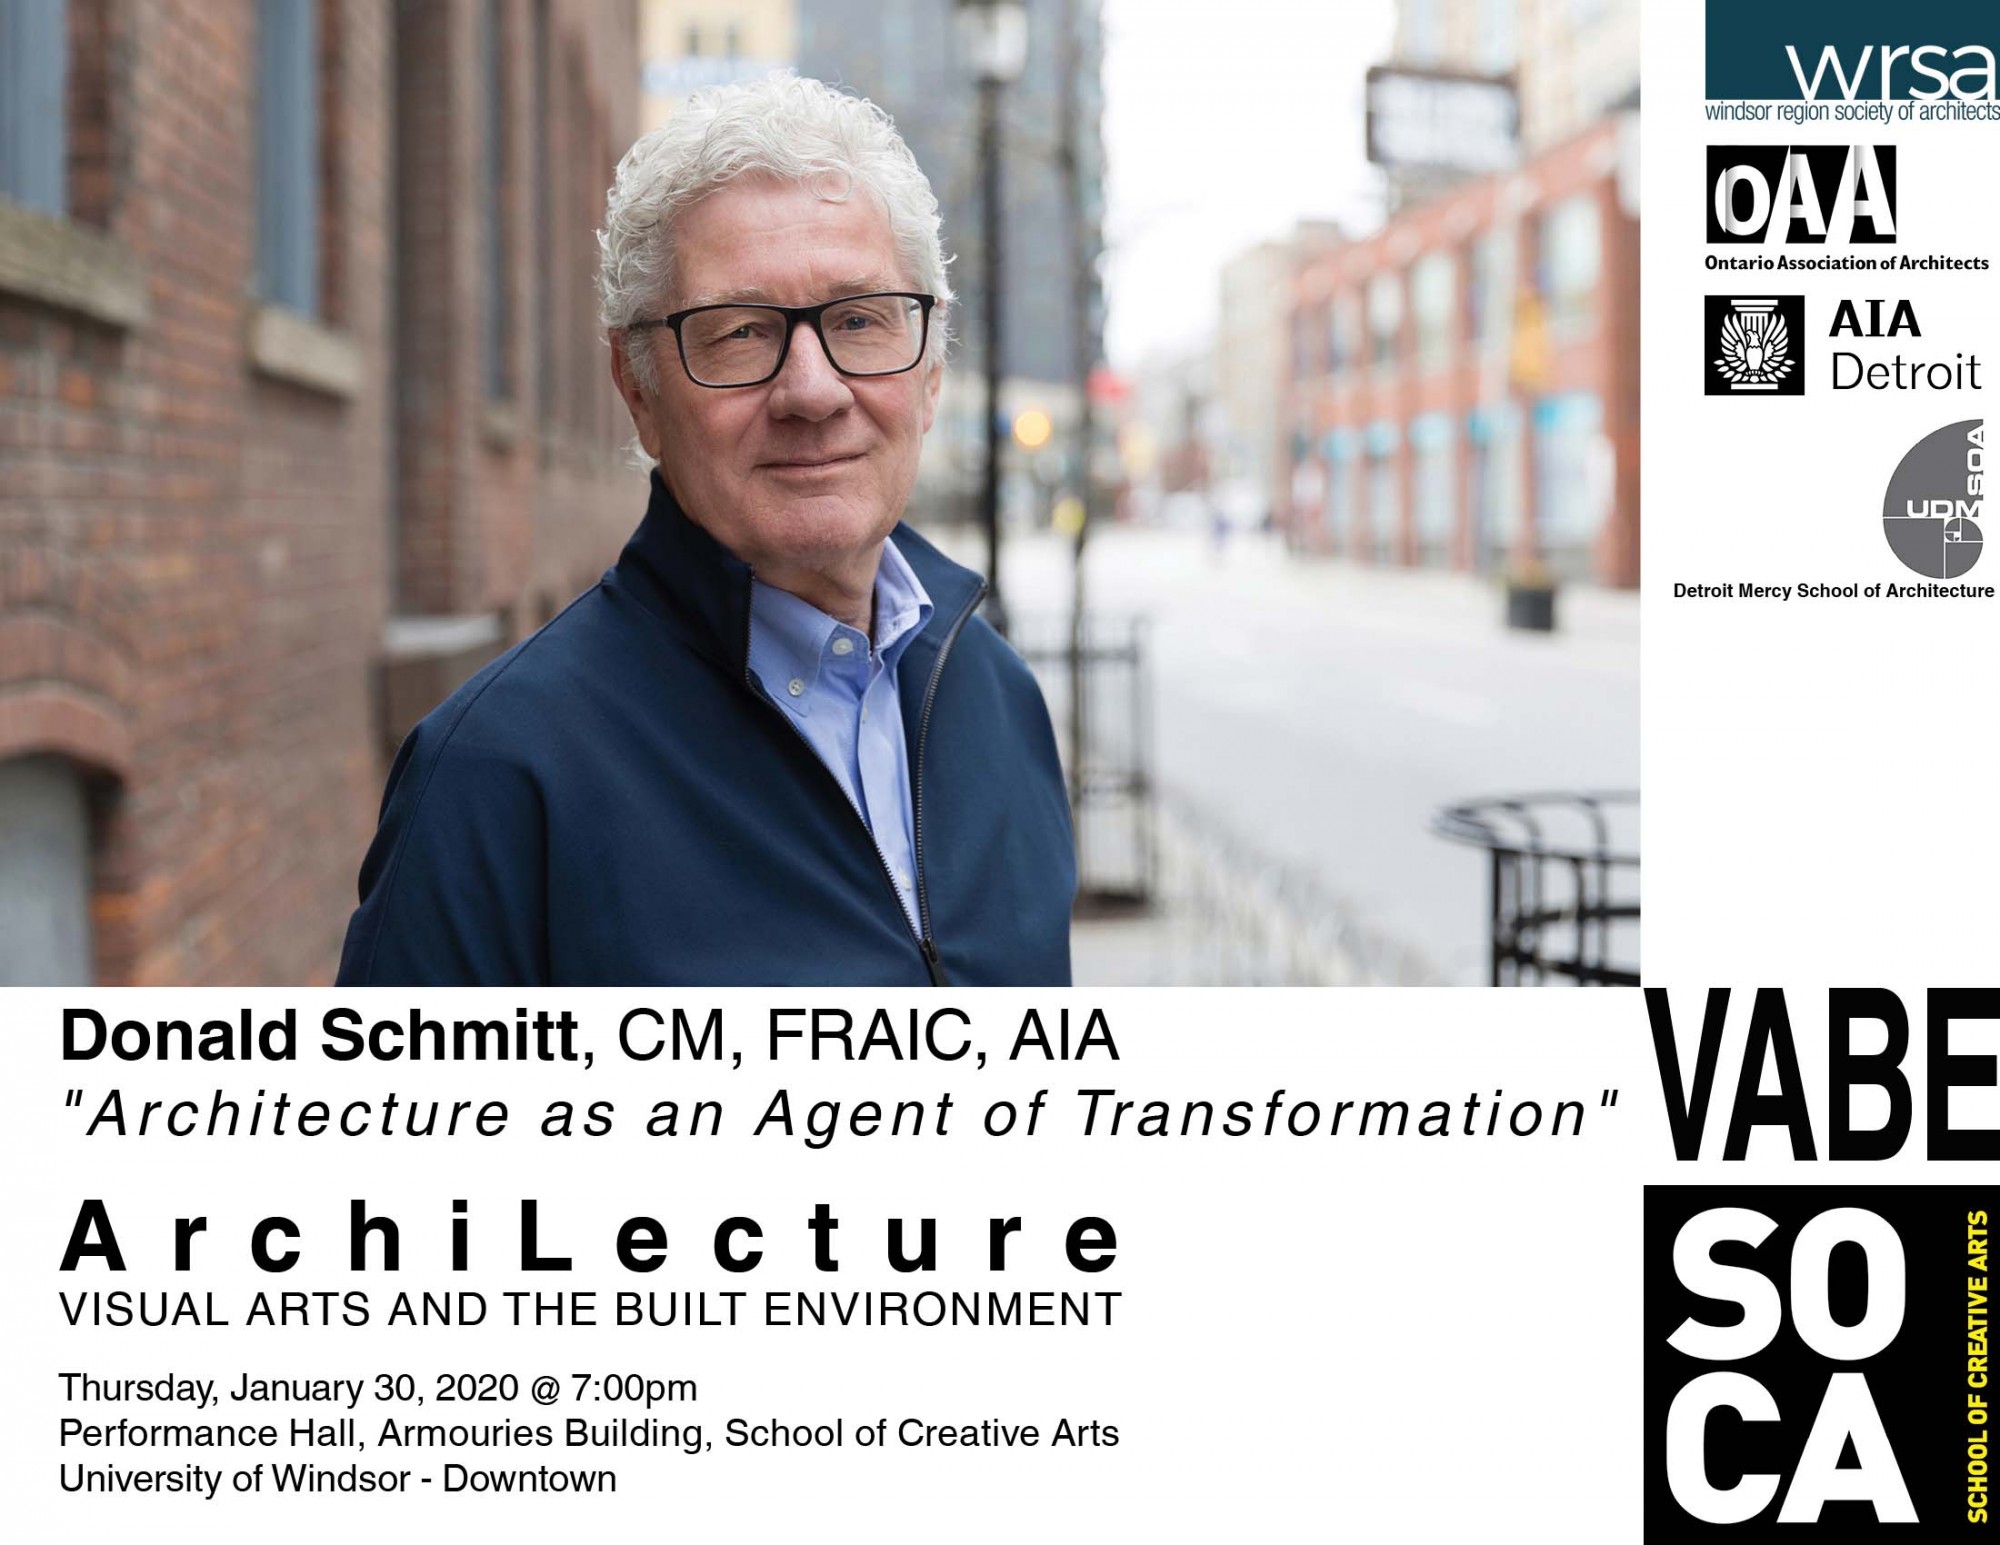 SoCA ArchiLecture with special guest Donald Schmitt